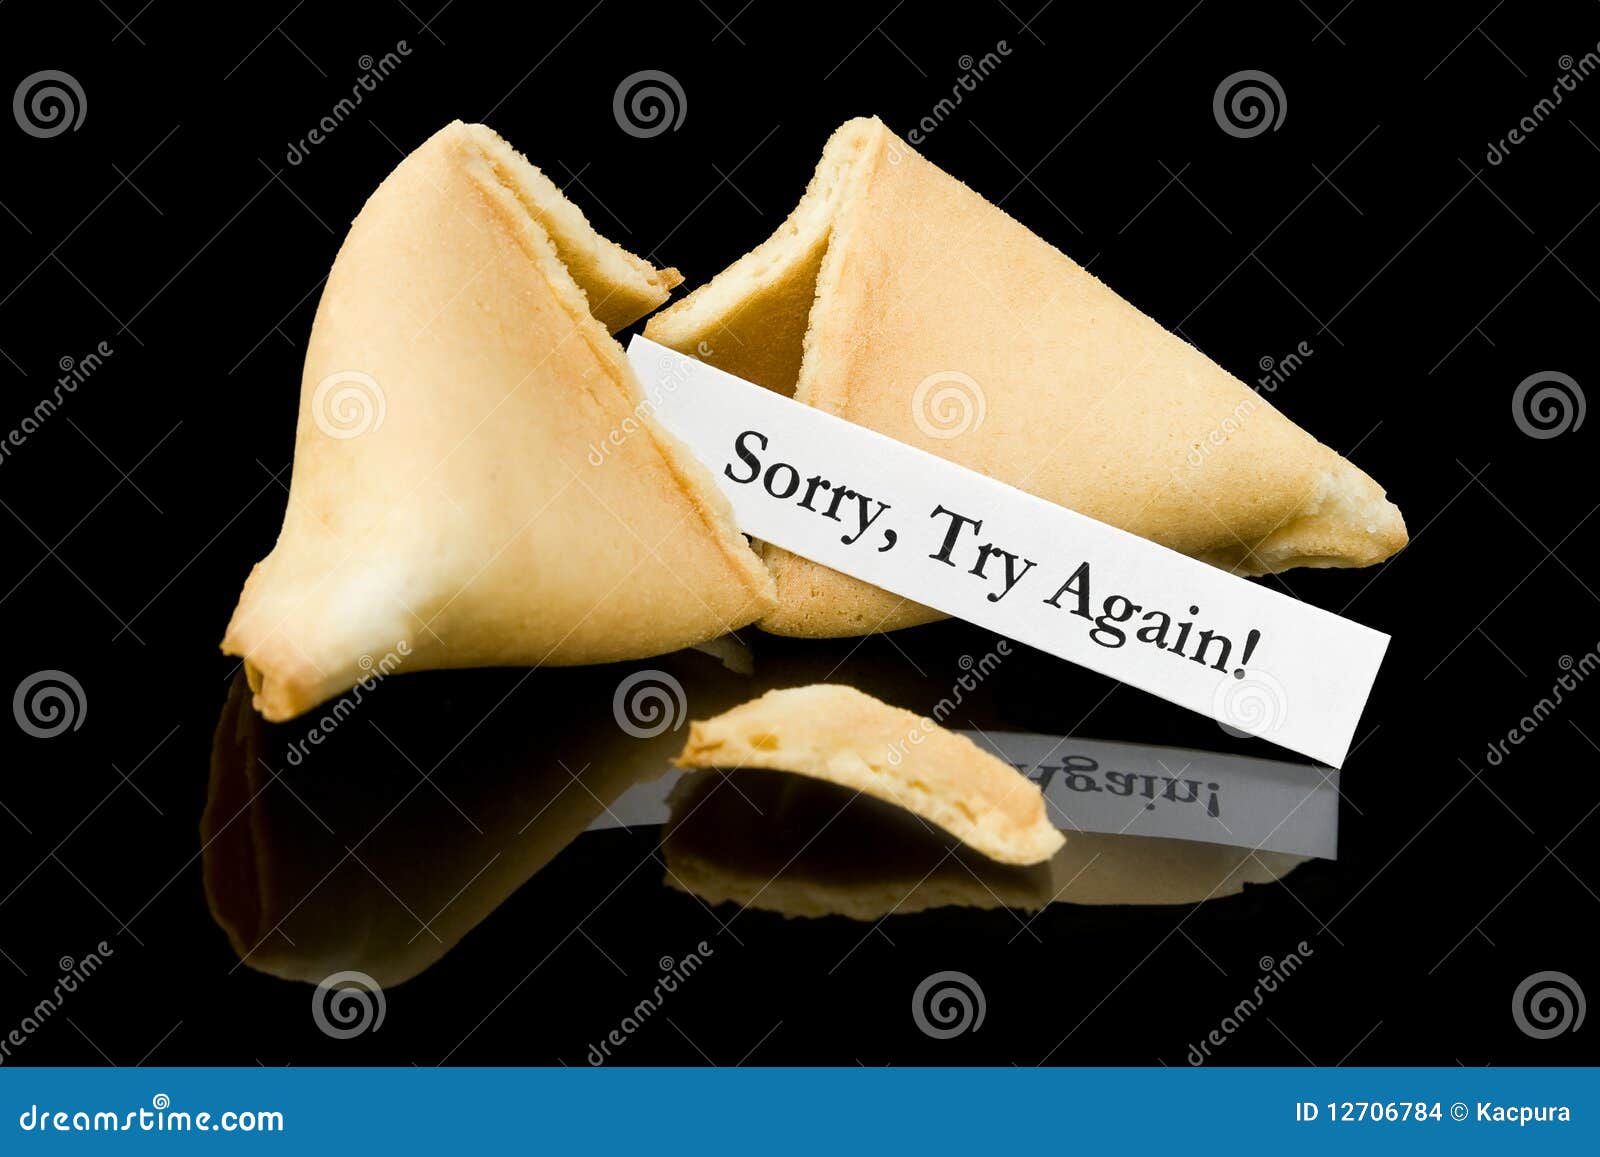 fortune cookie: sorry, try again!